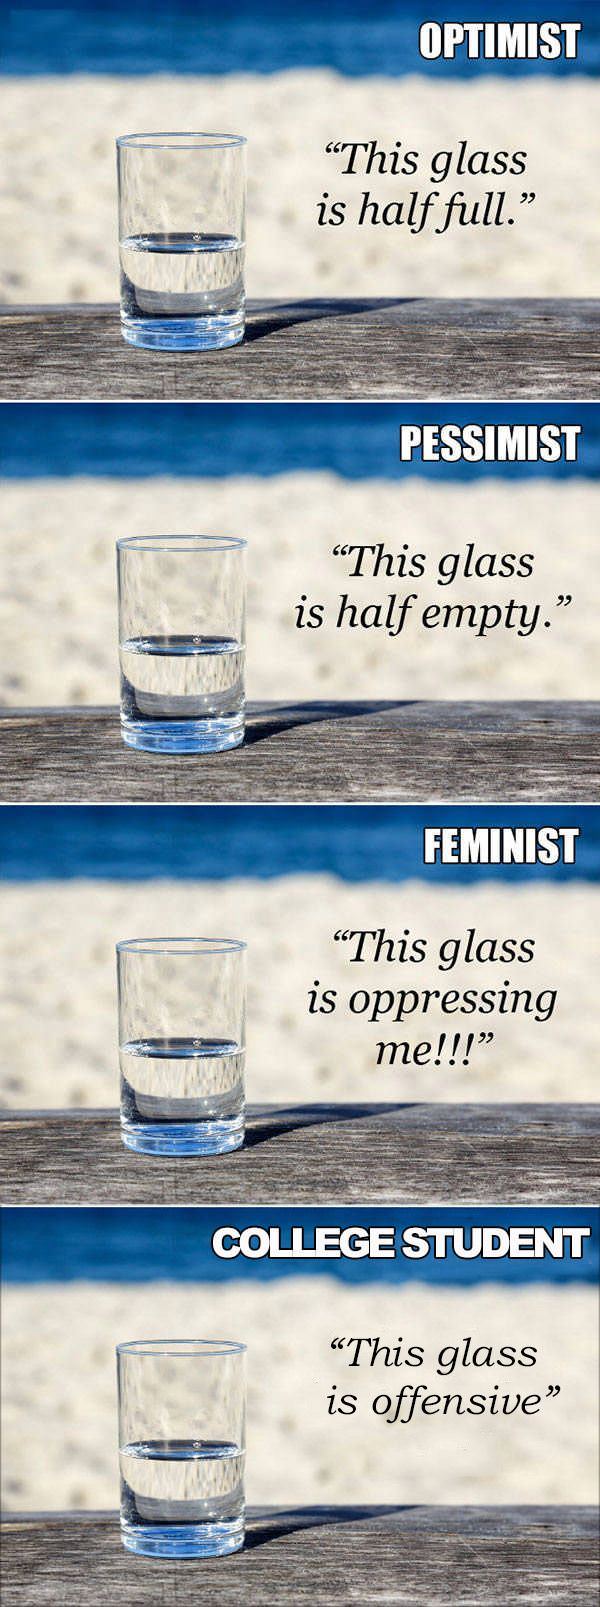 this glass funny picture